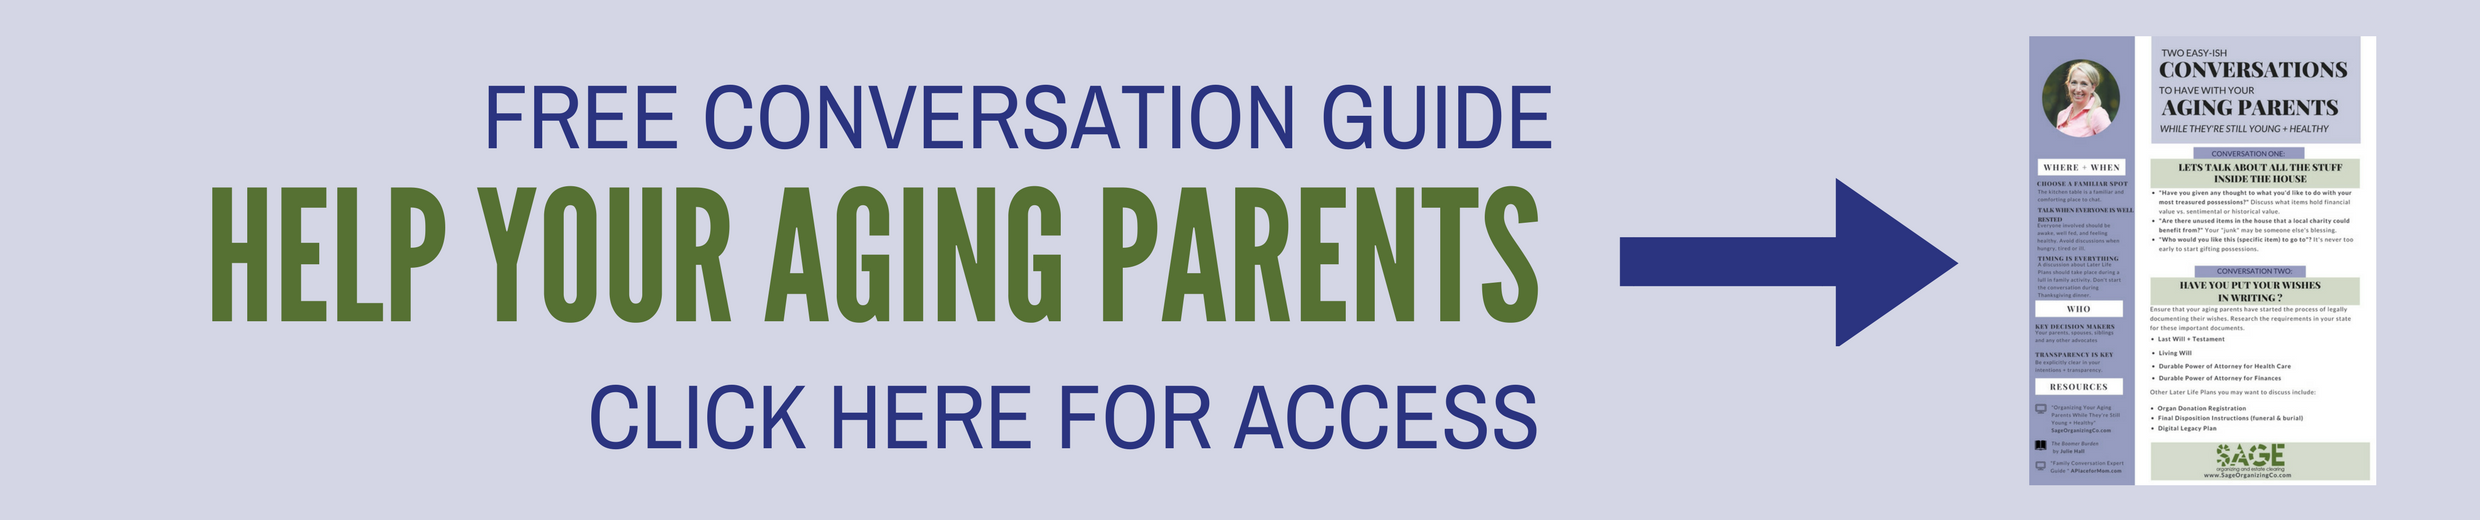 help your aging parents conversation guide from Sage Organizing Co. 